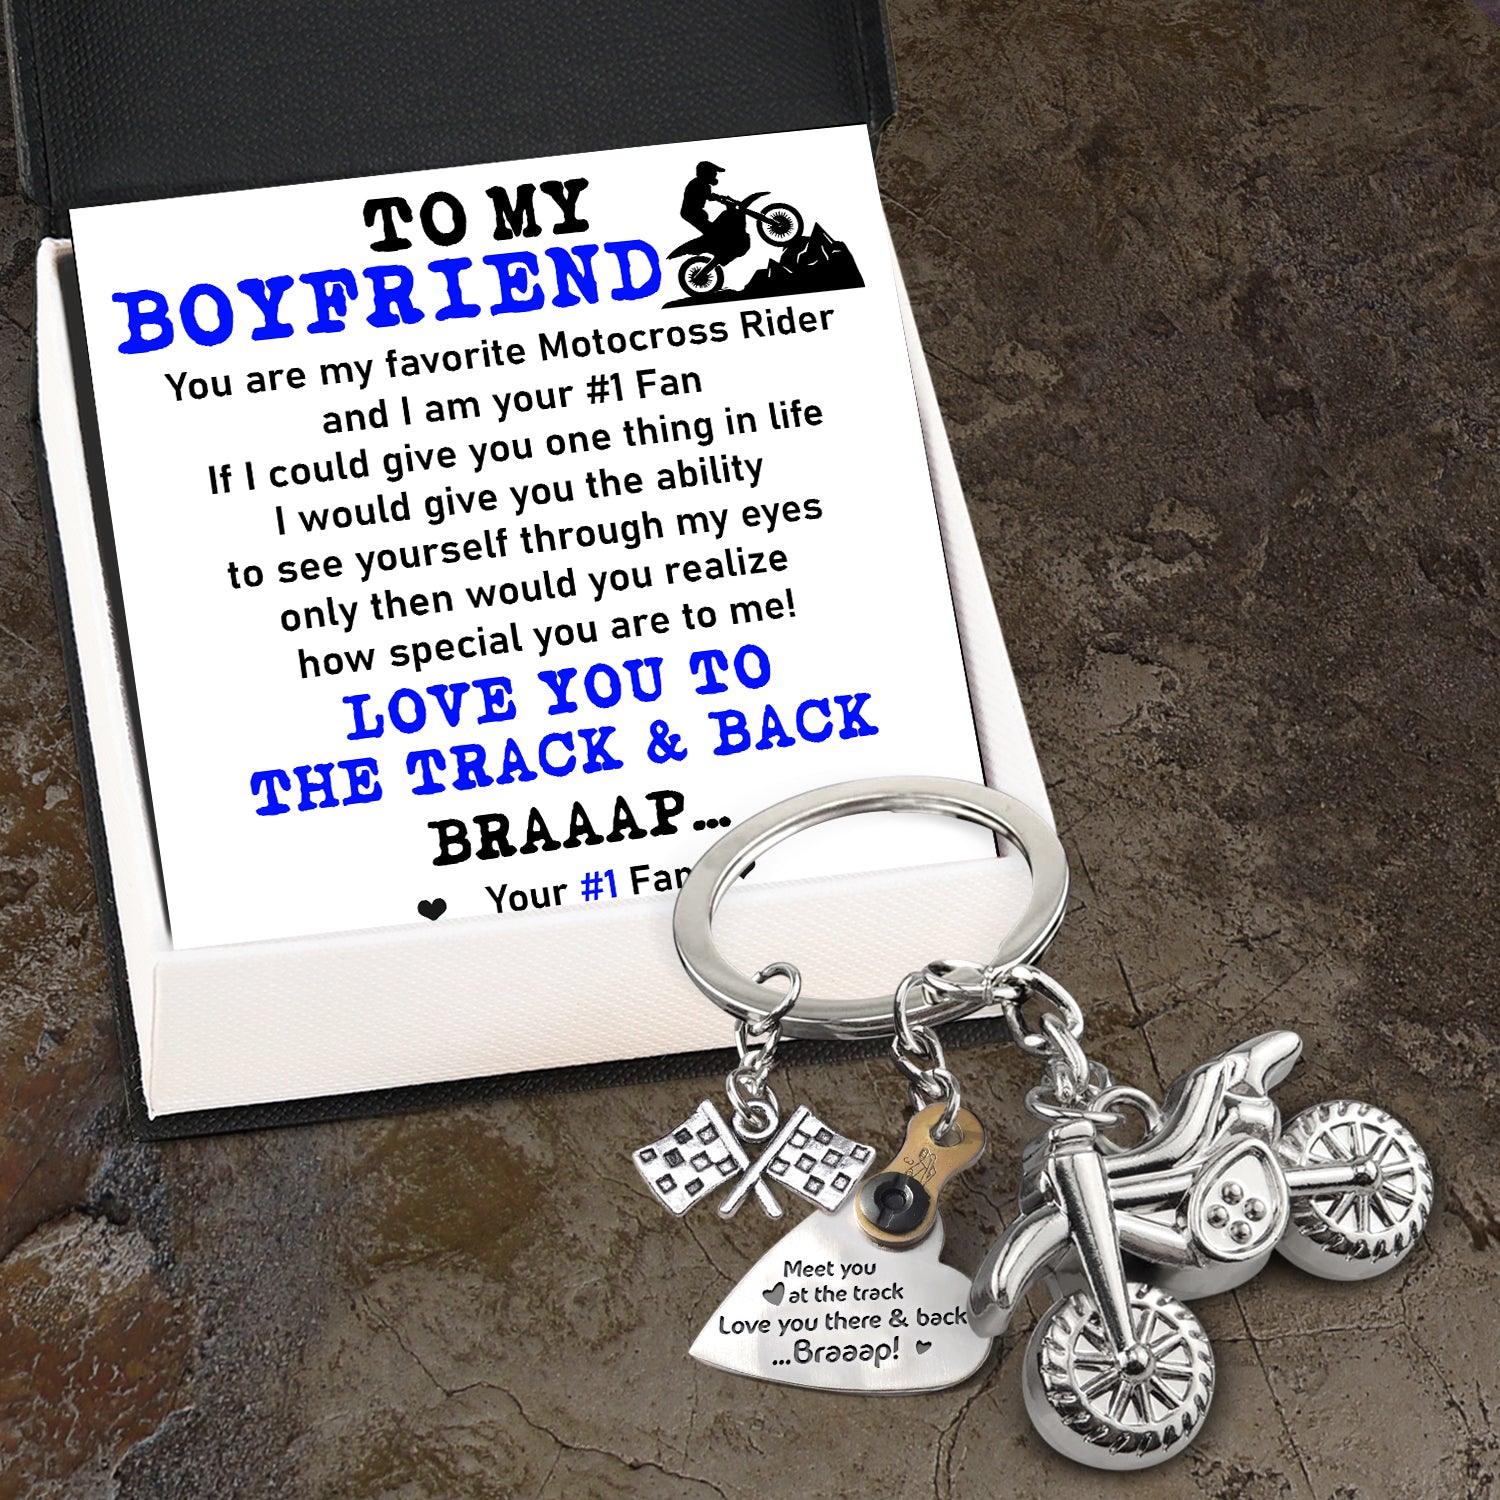 Dirt Bike Rider & Motocross Rider - Biker - To My Boyfriend - How Special You Are To Me - Gkex12007